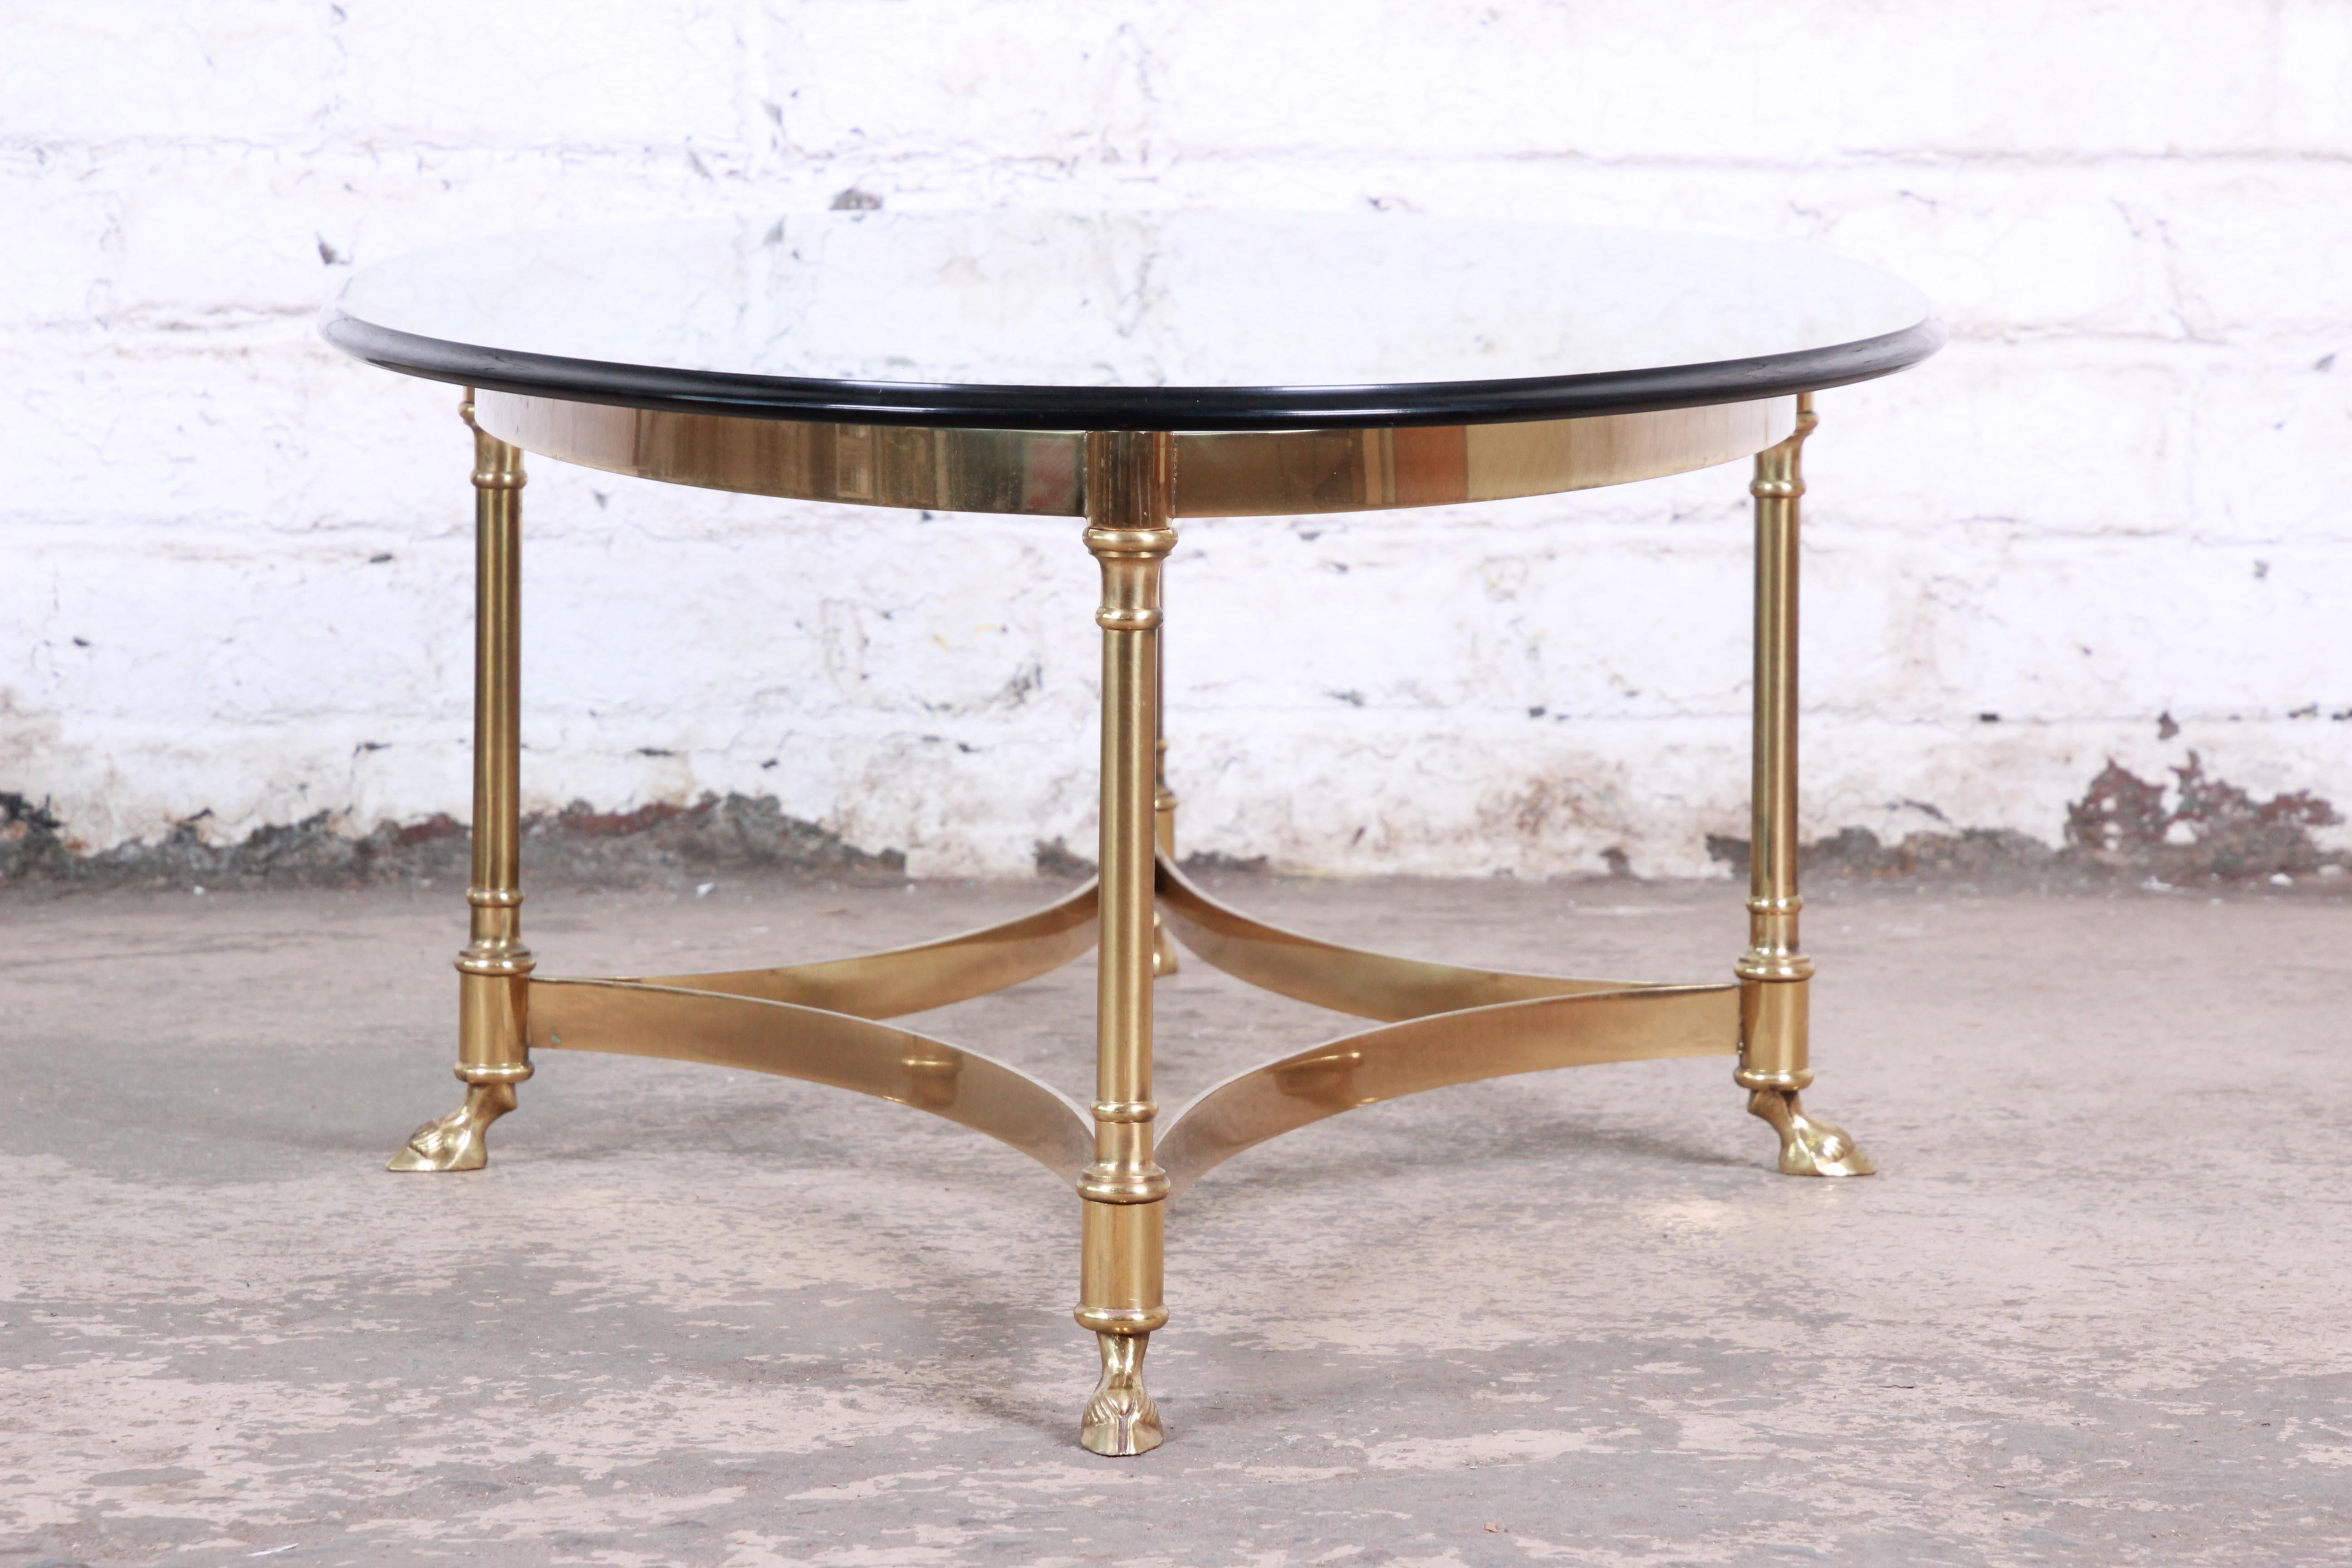 Labarge Midcentury Hollywood Regency Brass and Glass Hooved Feet Coffee Table 1